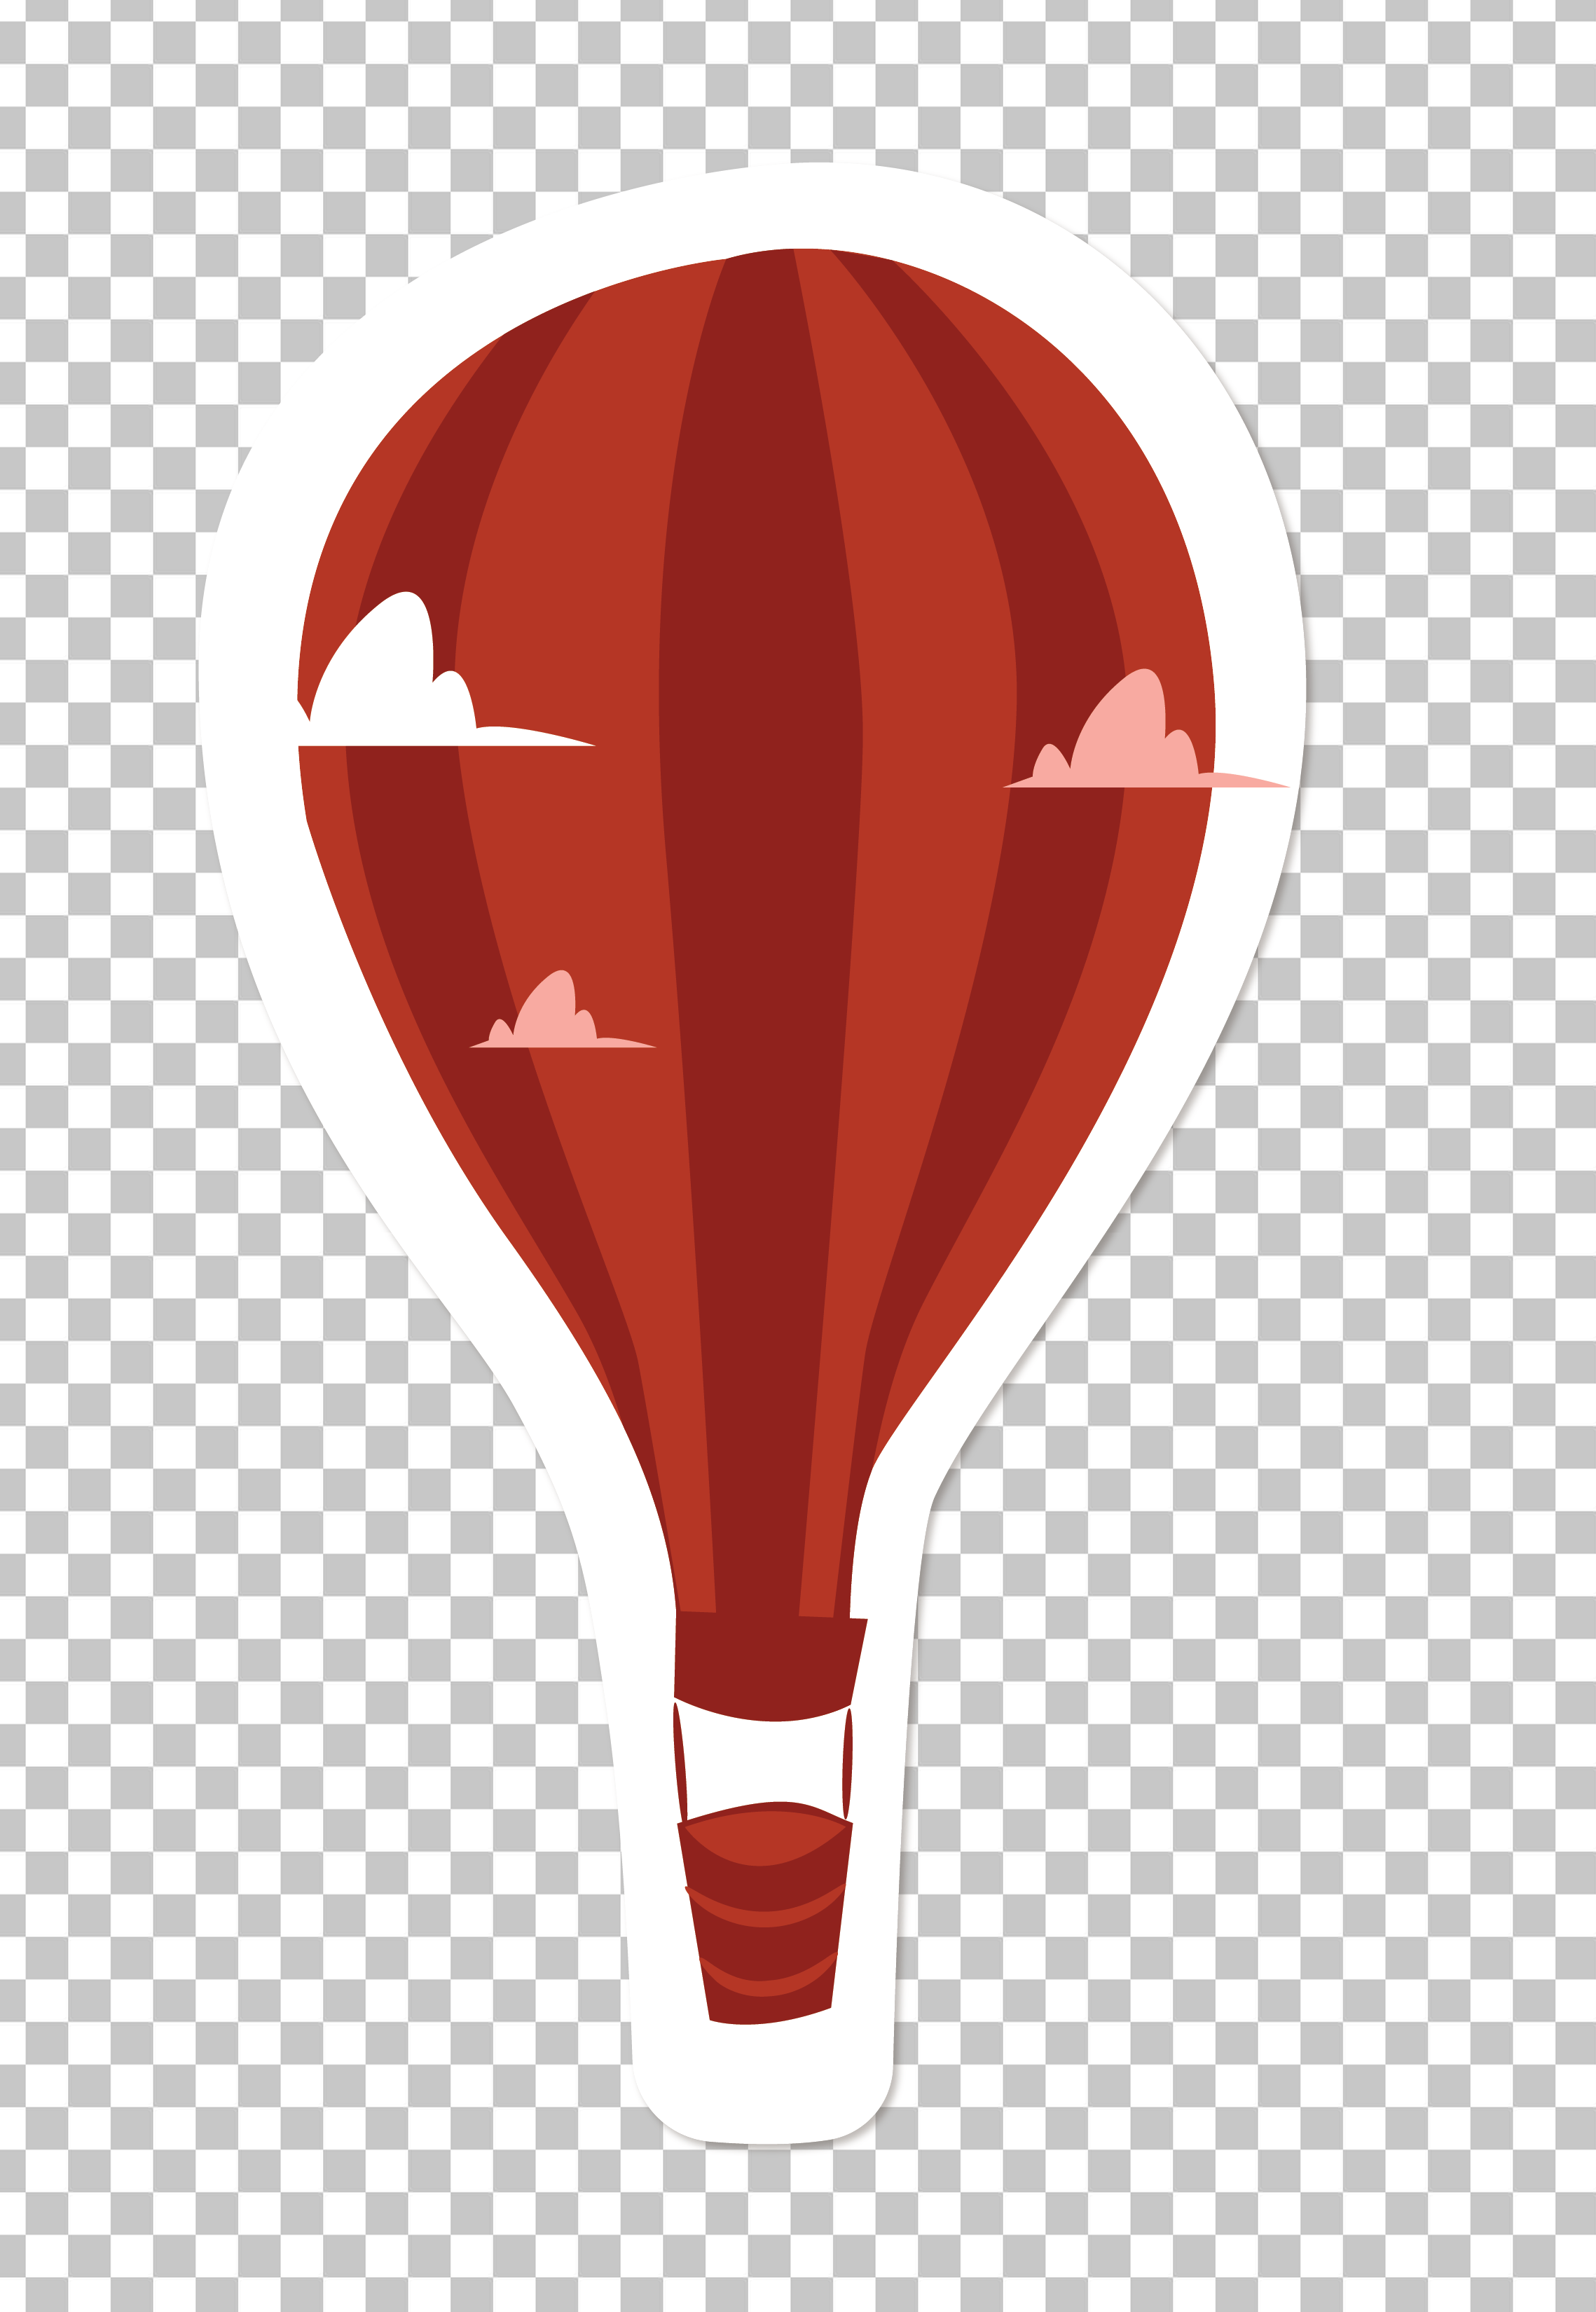 Red Hot Air Balloon Sticker PNG.